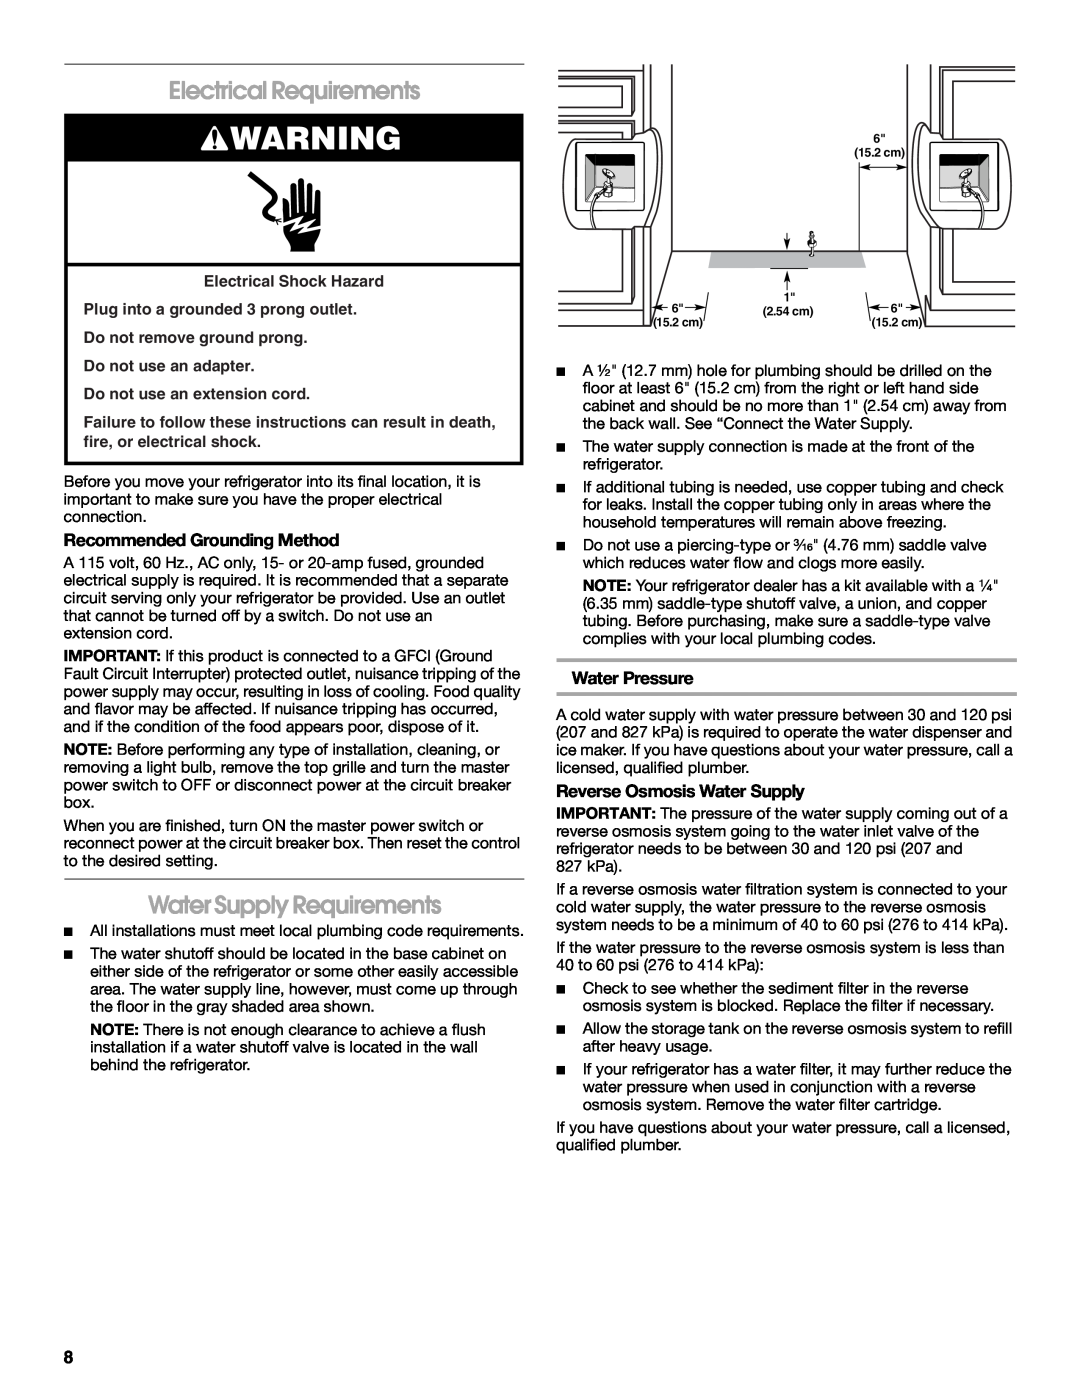 Jenn-Air W10379136B manual Electrical Requirements, Water Supply Requirements, Recommended Grounding Method, Water Pressure 